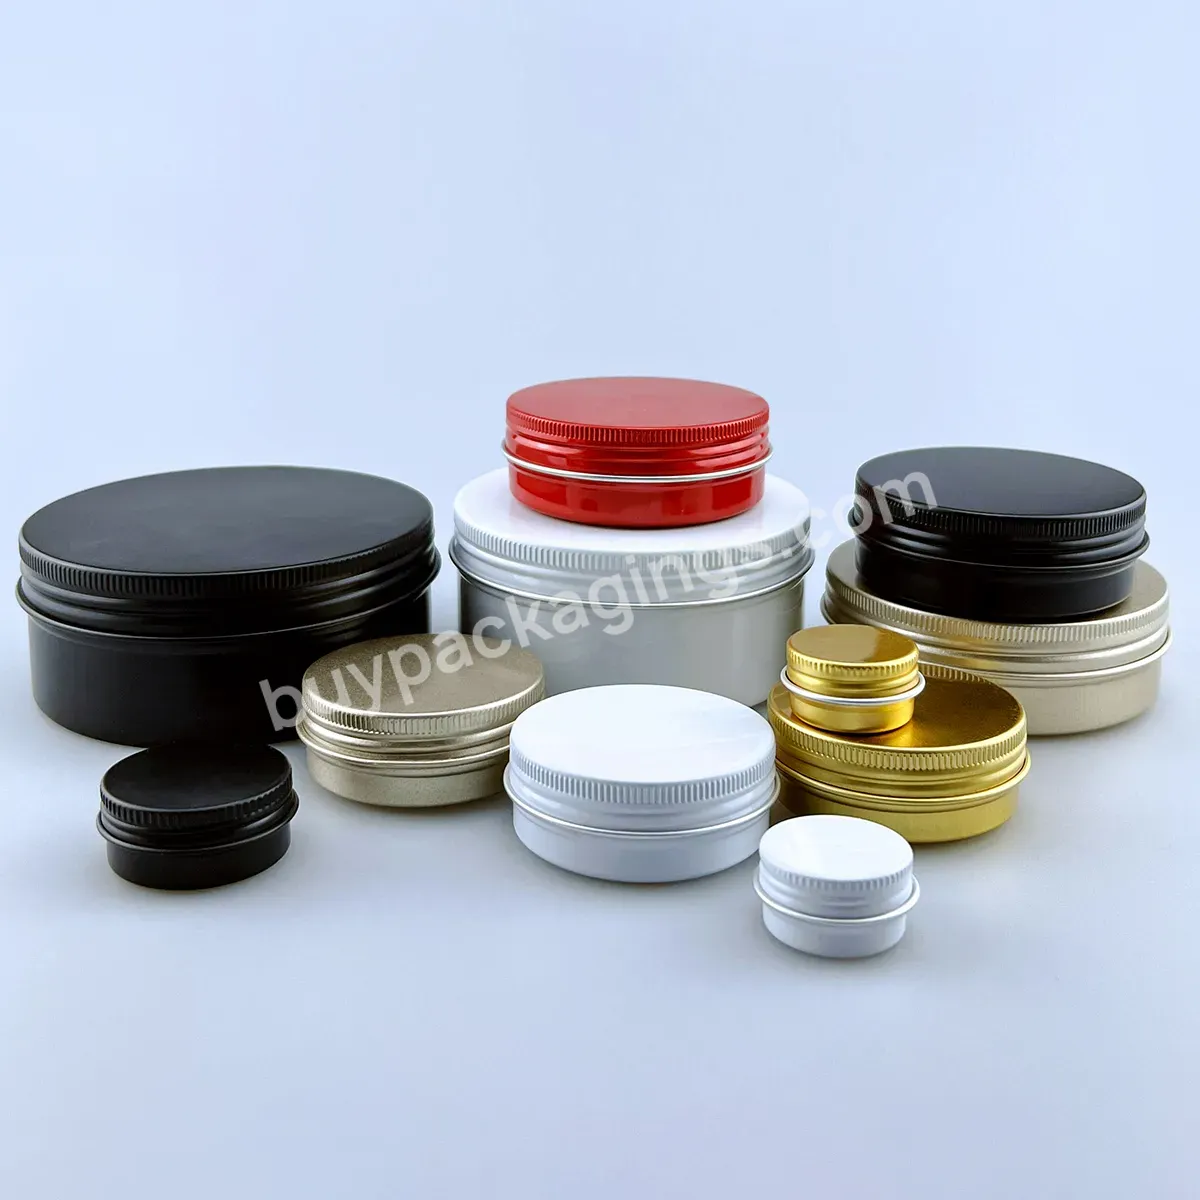 5ml 10ml 20ml 30ml 50ml 60ml 80ml 100ml 120ml 150ml 180ml Round Cosmetic Containers Jars Screw Lid Soap Bar Packaging Tins - Buy New Arrival Tin Box Solid Soap Hair Care Vegan Natural Organic Handmade Shampoo Soap Ba,Hot Selling Hair And Beard Care O